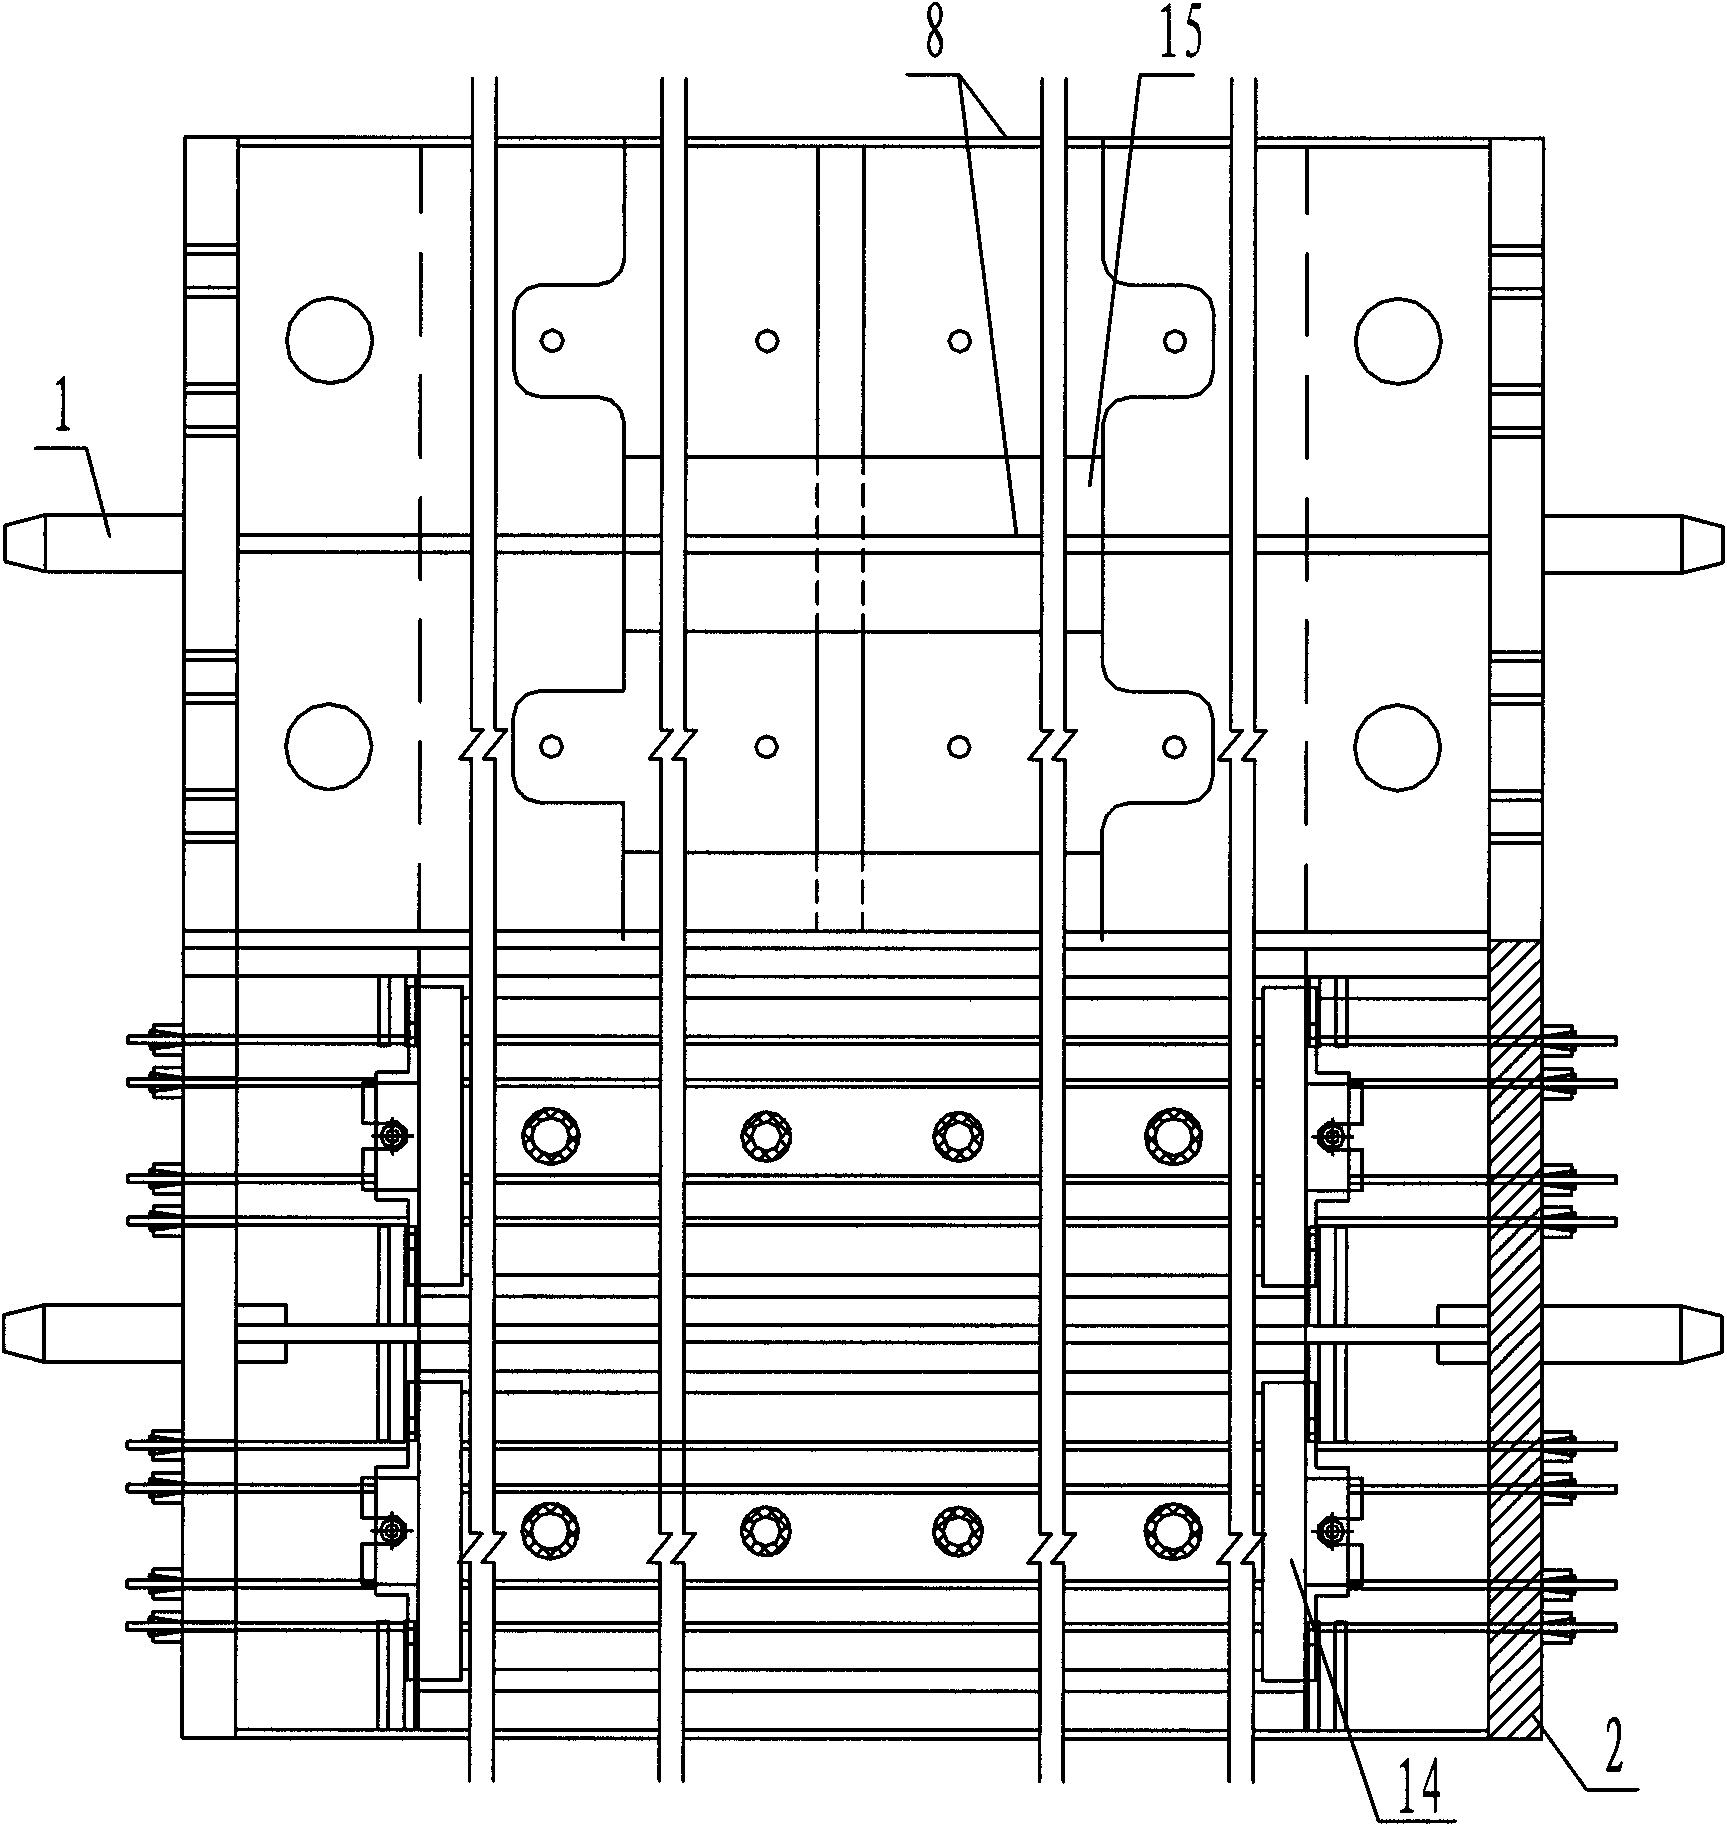 Method for tensioning pre-stressed reinforcement of ballast-less transition sleeper of ballast-less track